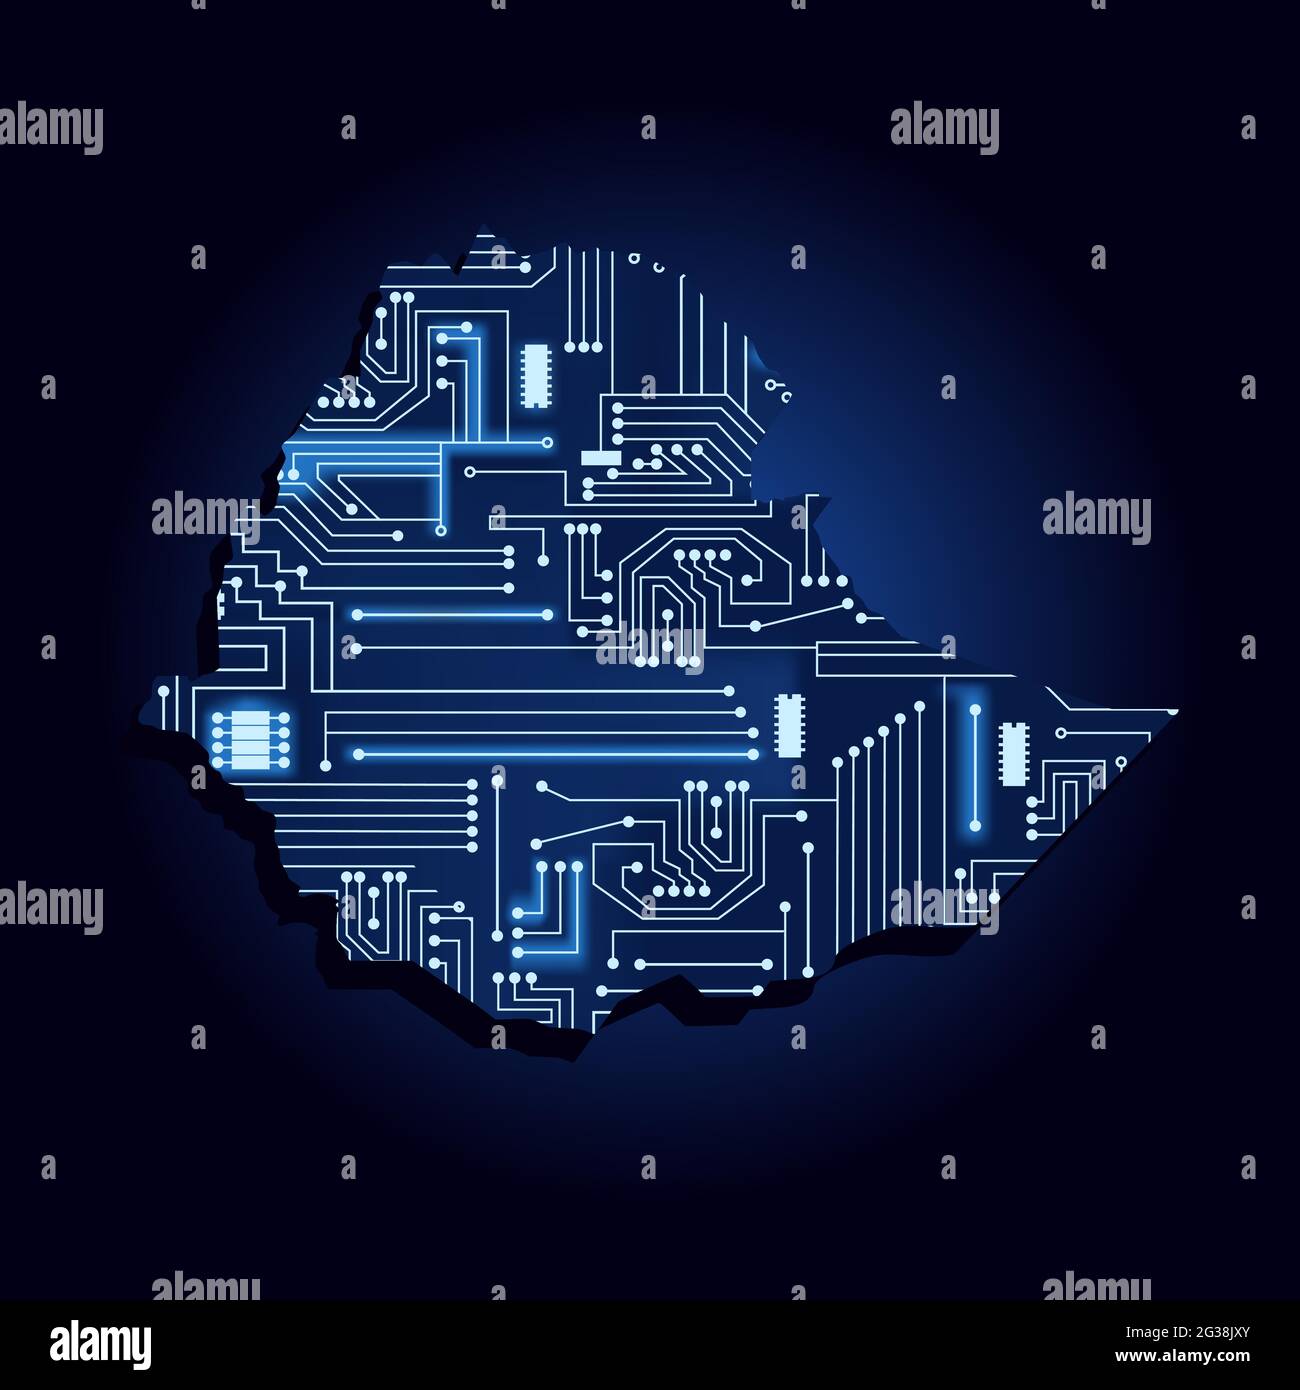 Contour map of Ethiopia with a technological electronics circuit. African country. Blue background. Stock Vector